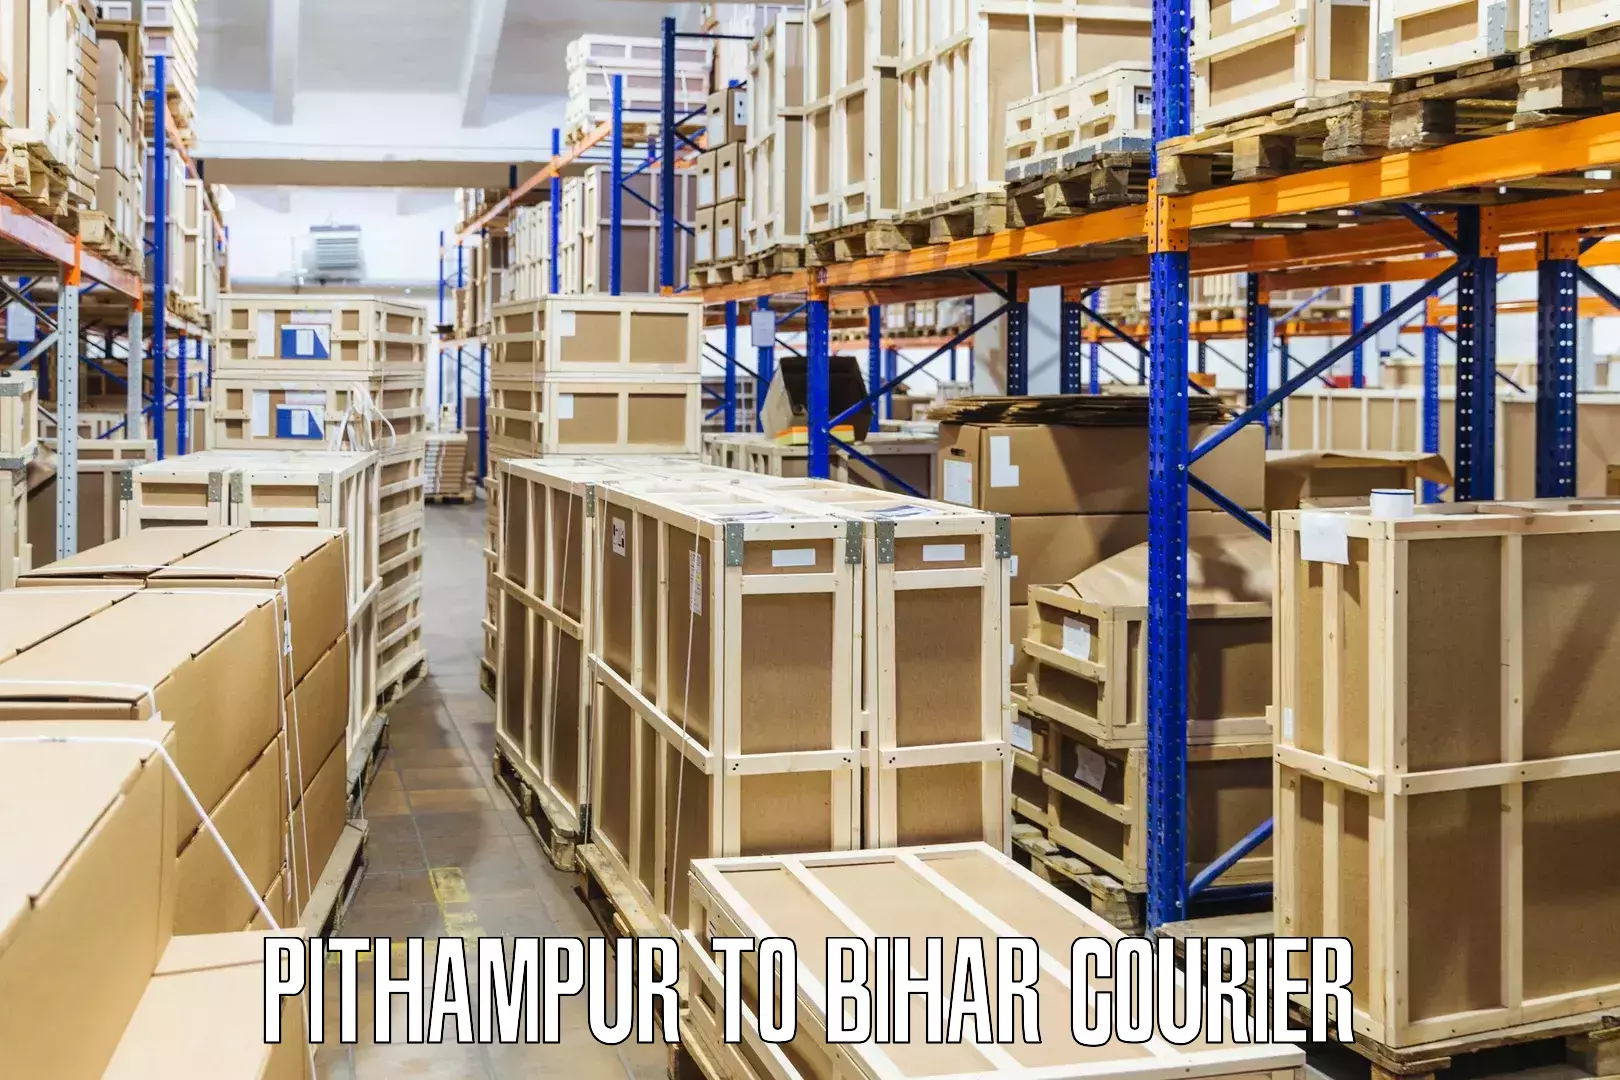 State-of-the-art courier technology Pithampur to Baniapur